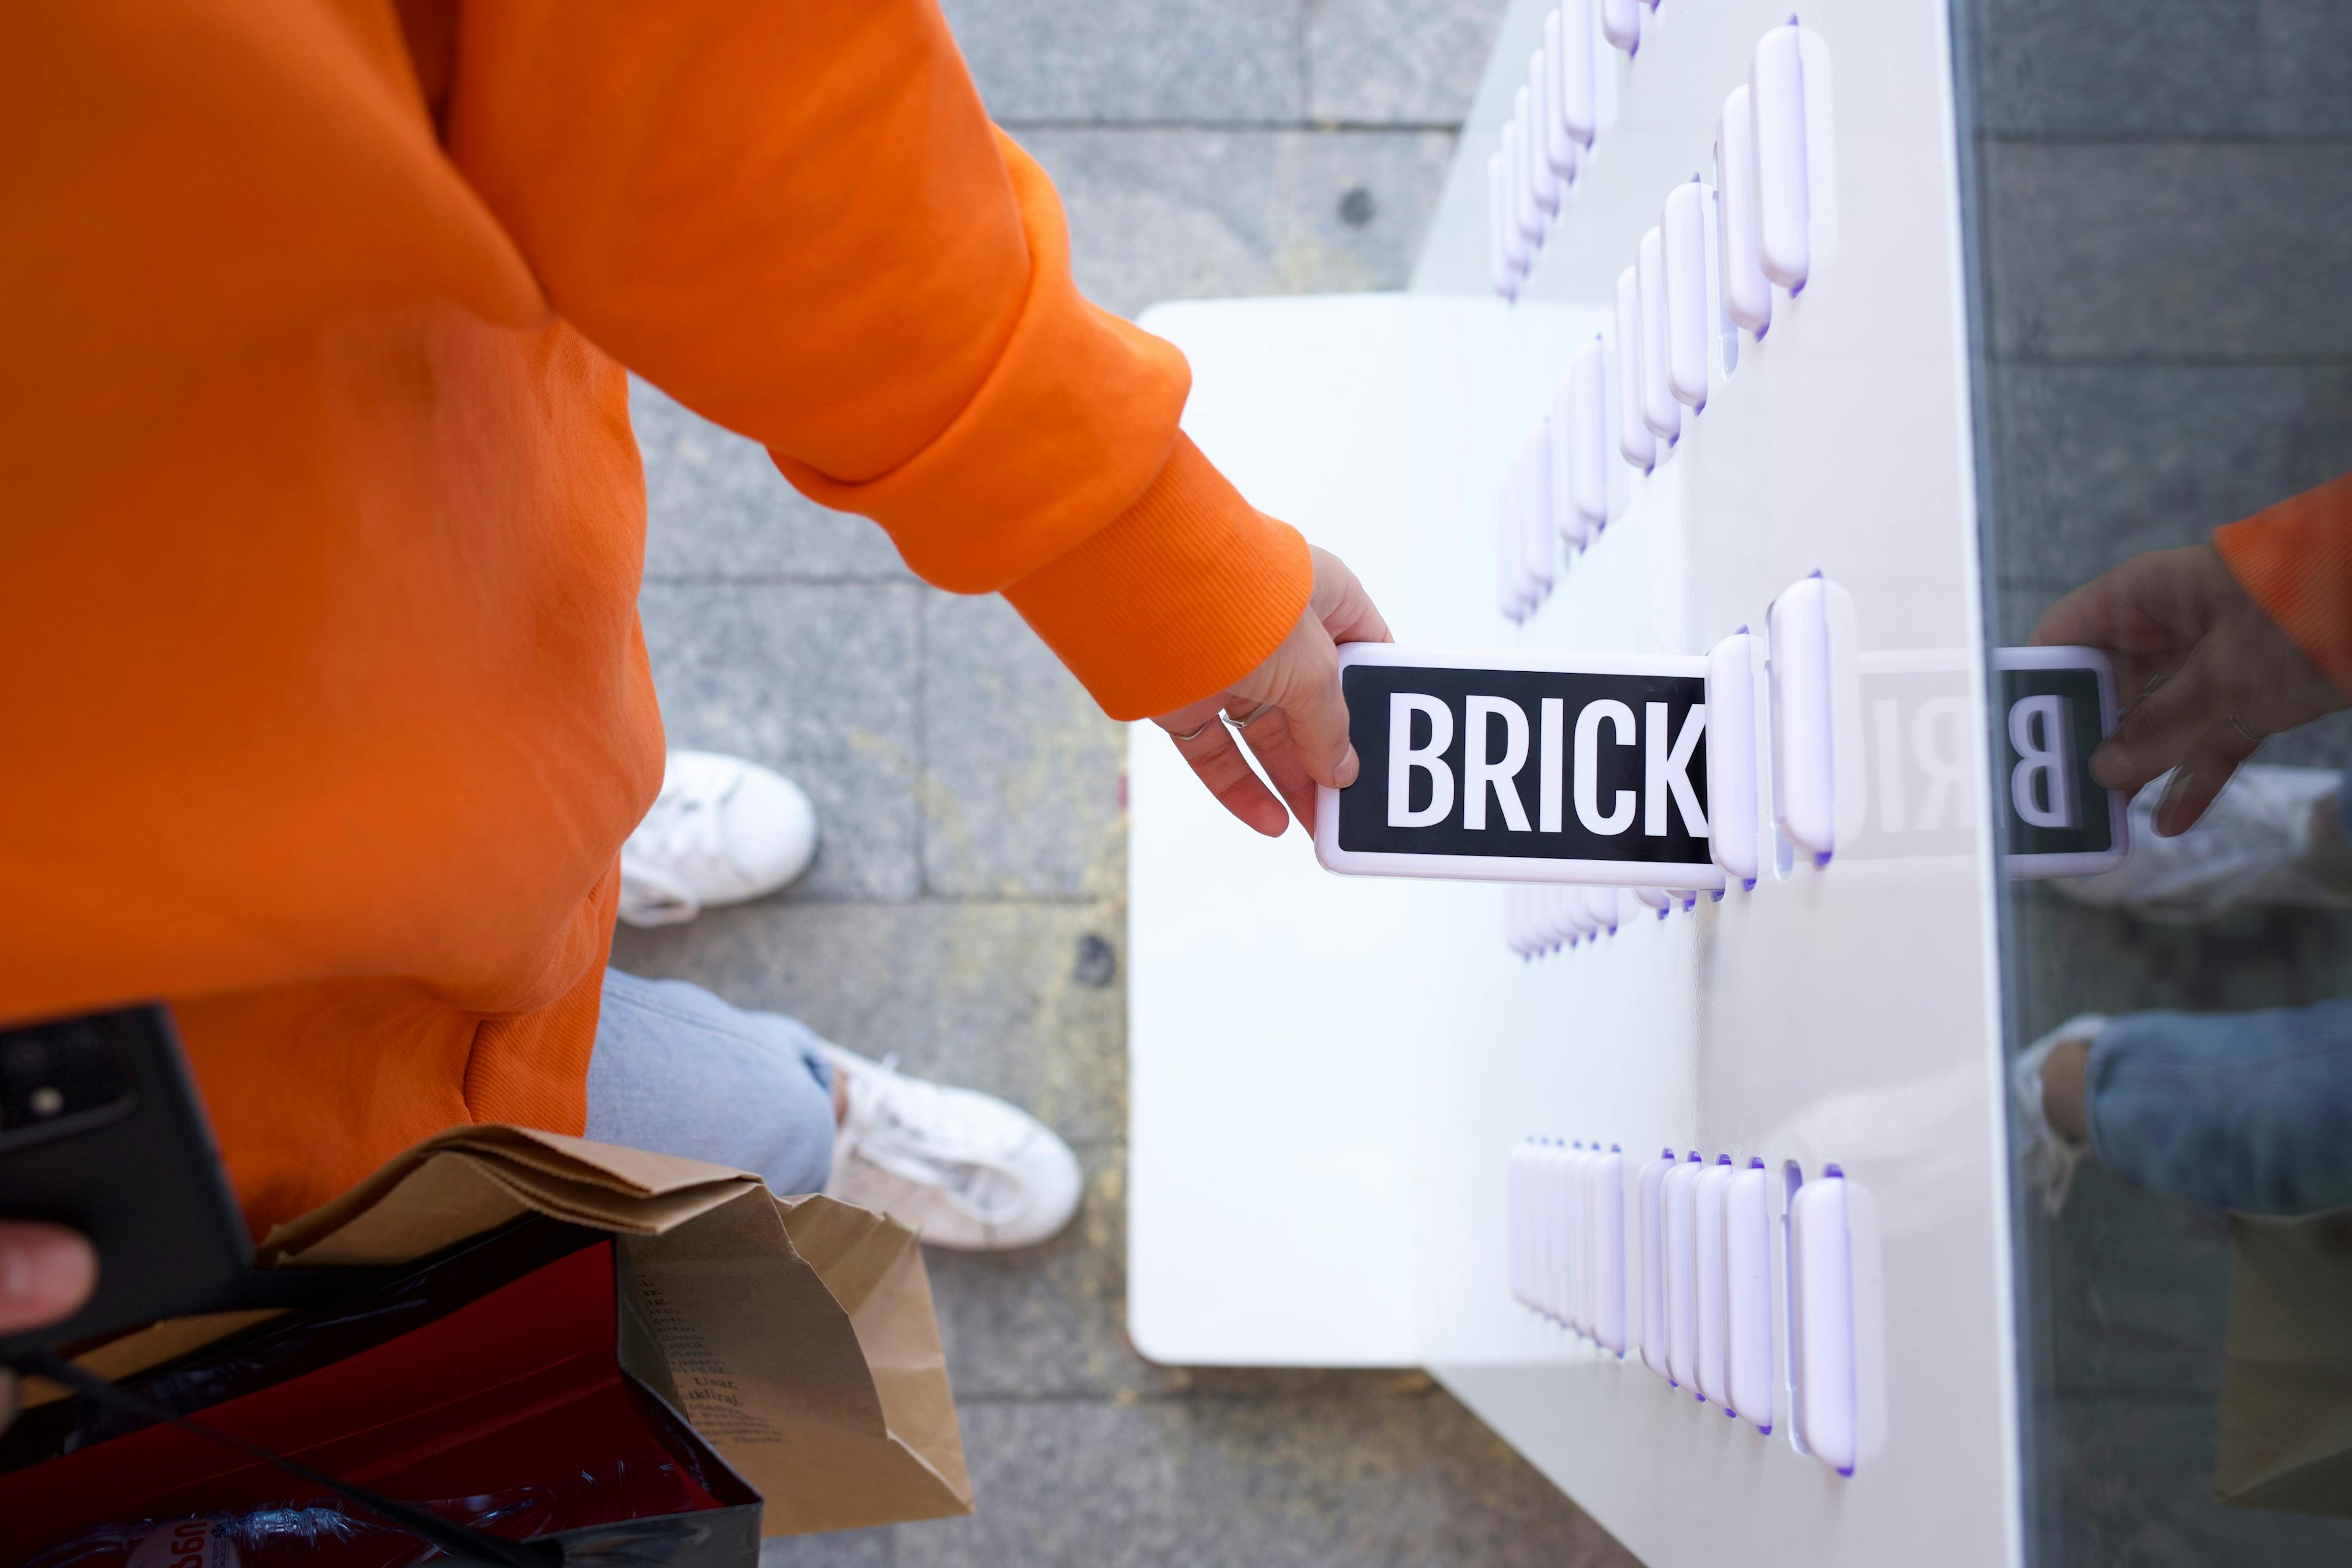 A hand getting a Brick power bank from a station